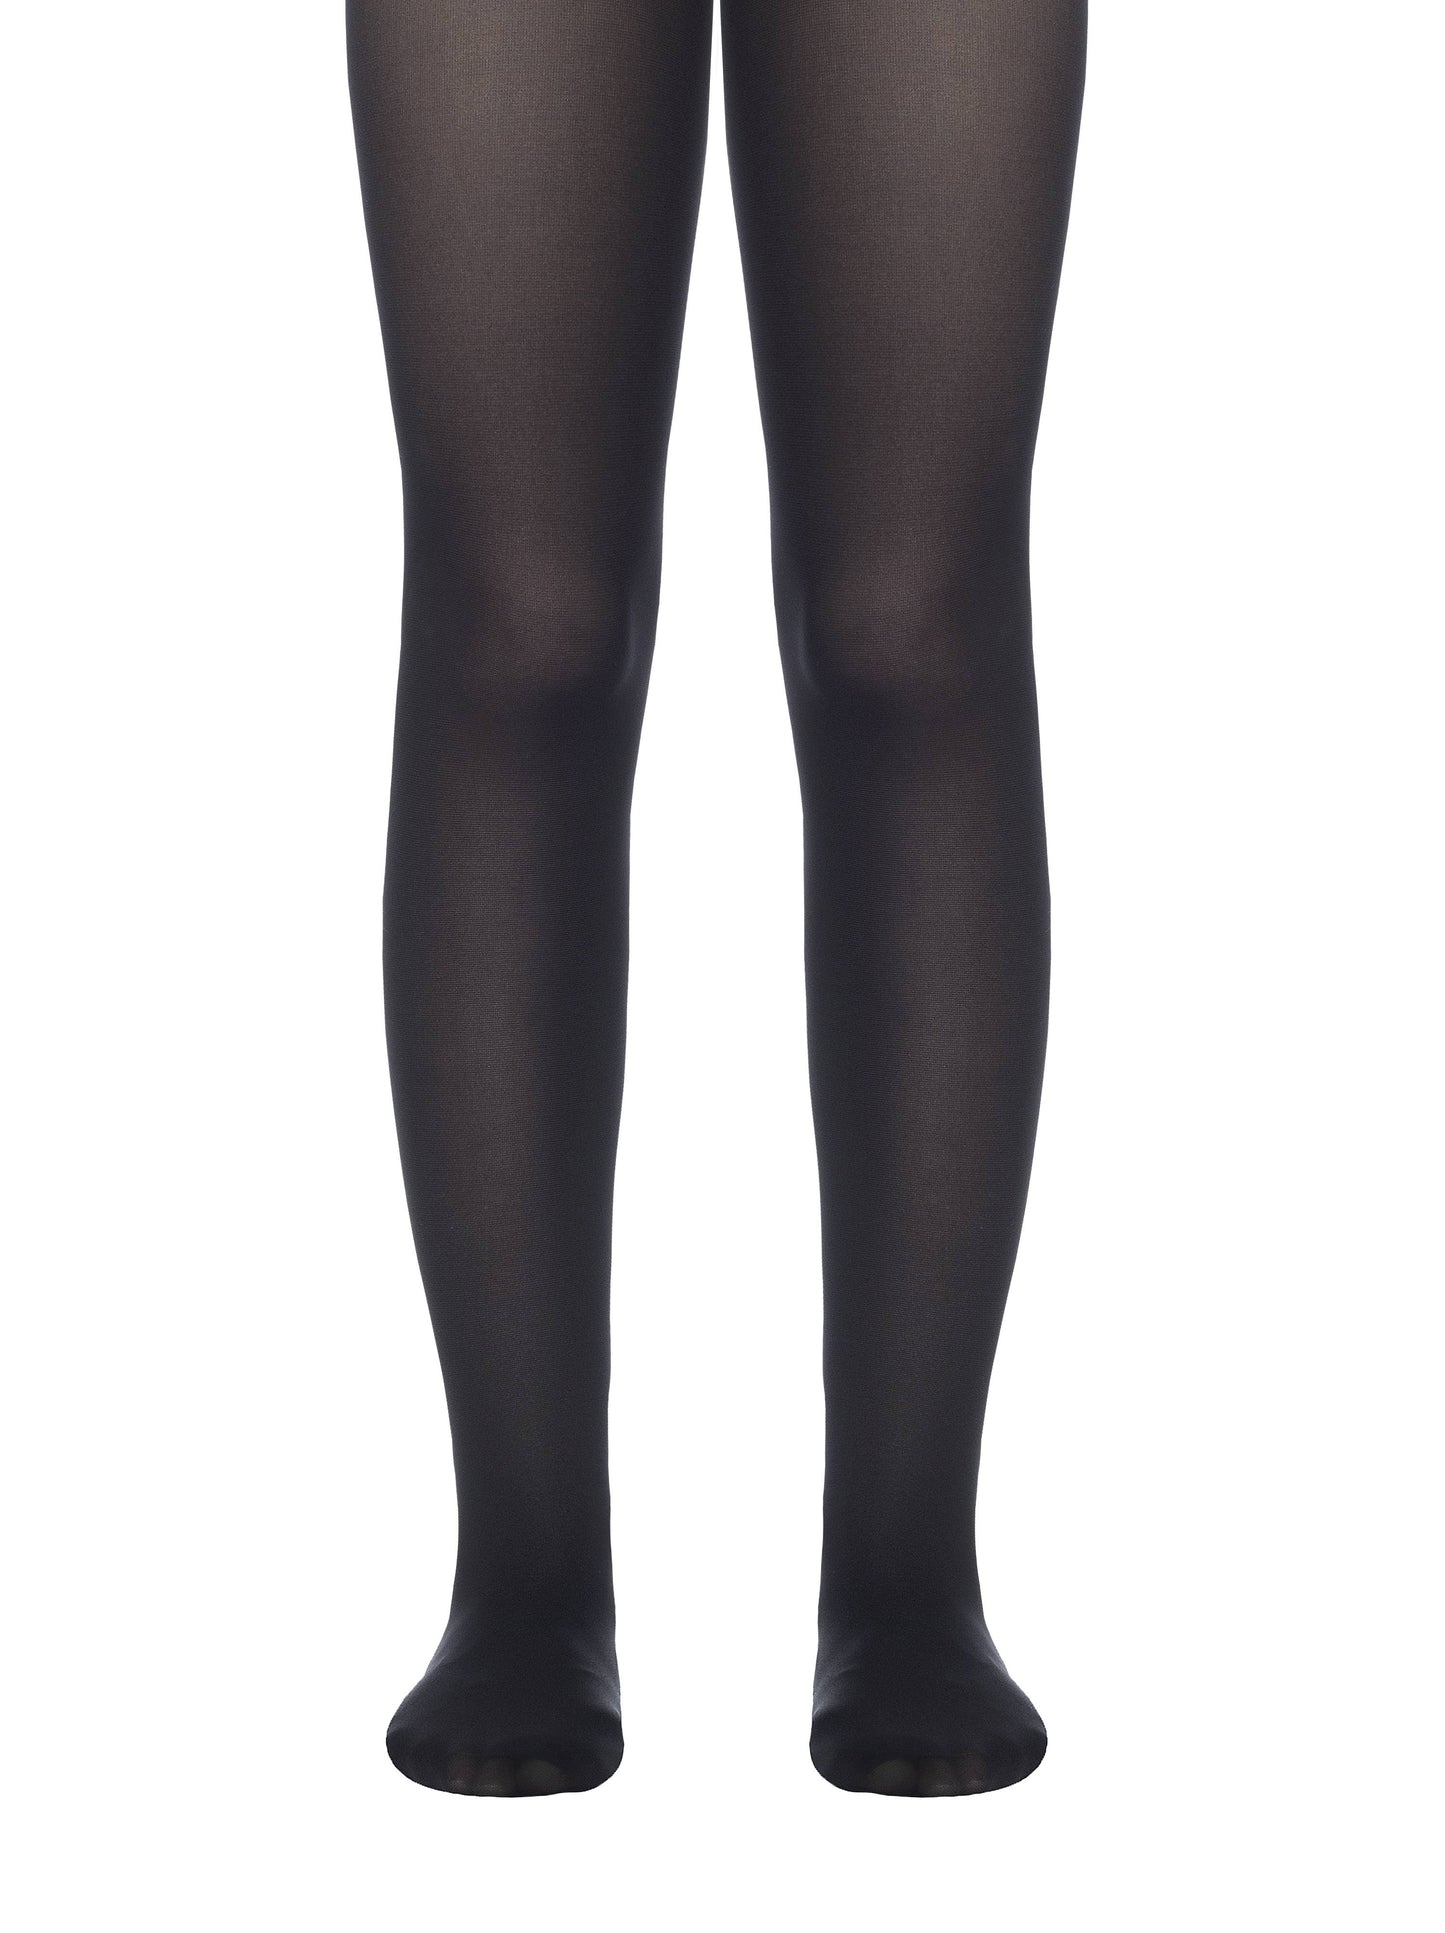 Conte Only 40 Den - Classic Semi-Opaque Tights For Girls/Teens - 10yr. 12yr. (12С-18СП)